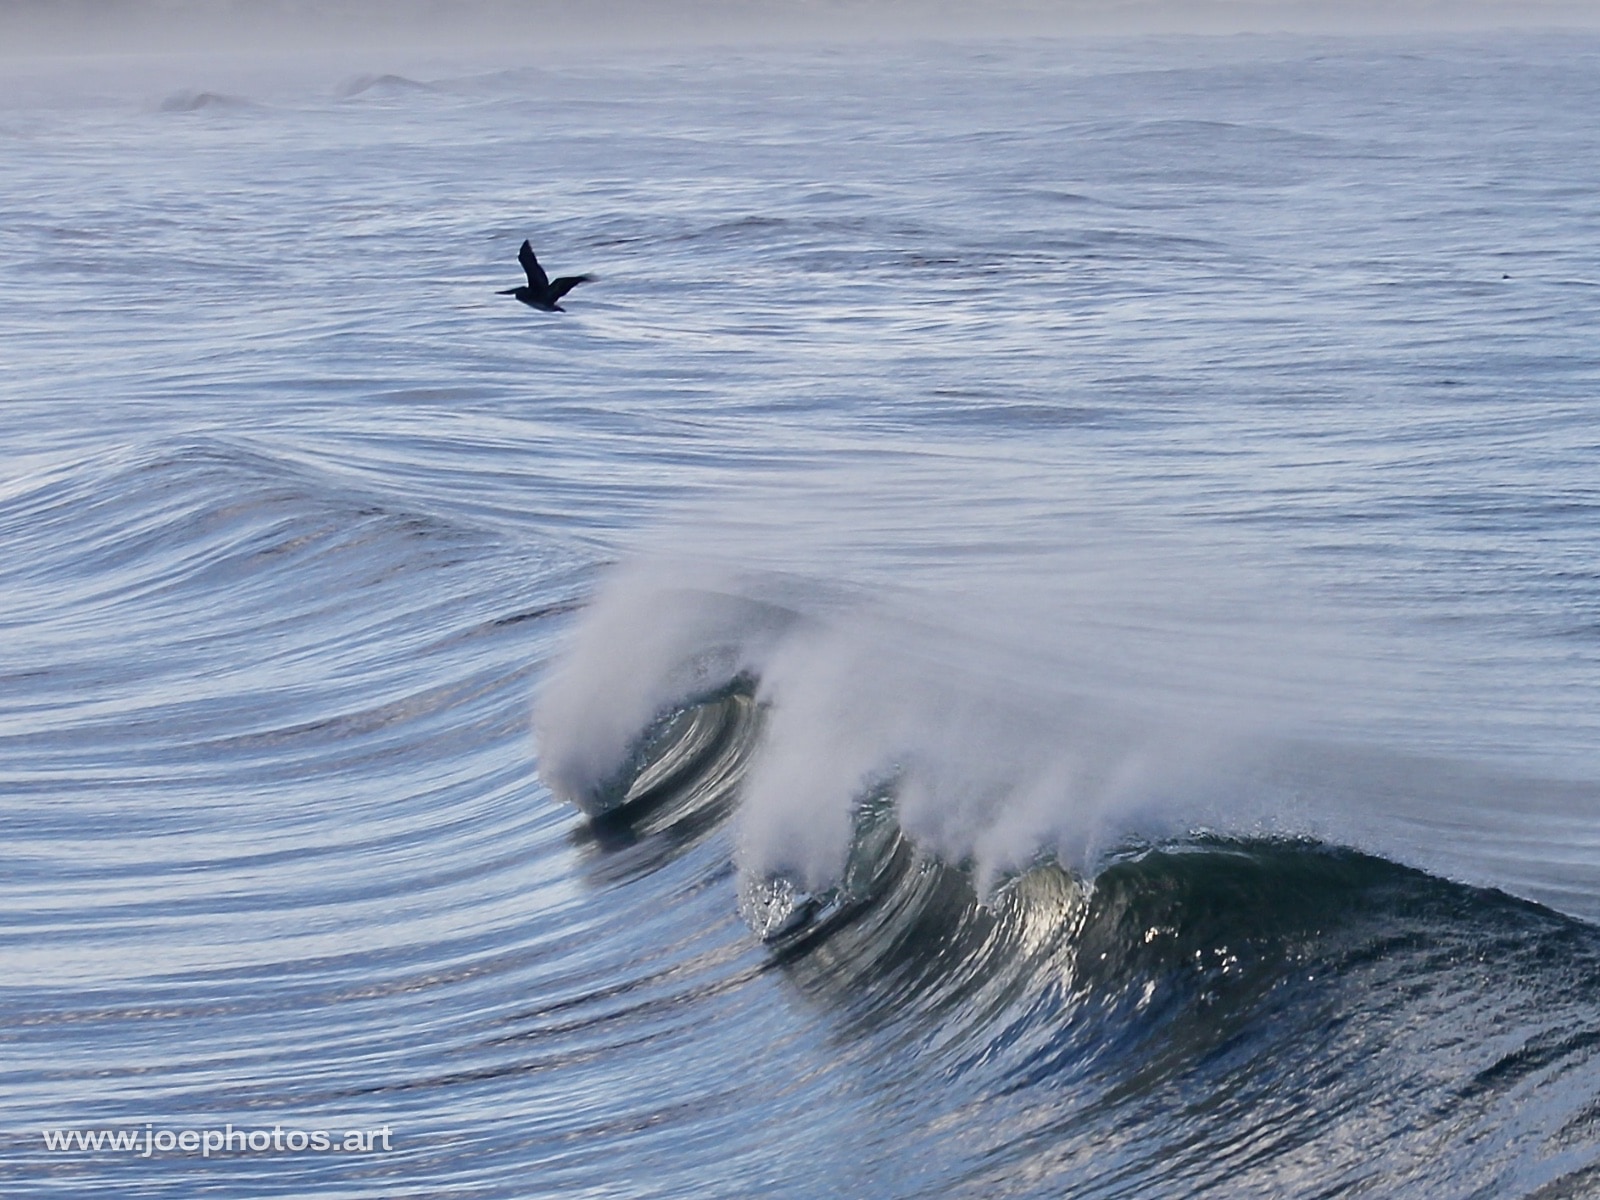 Ocean waves at sunrise with pelican.